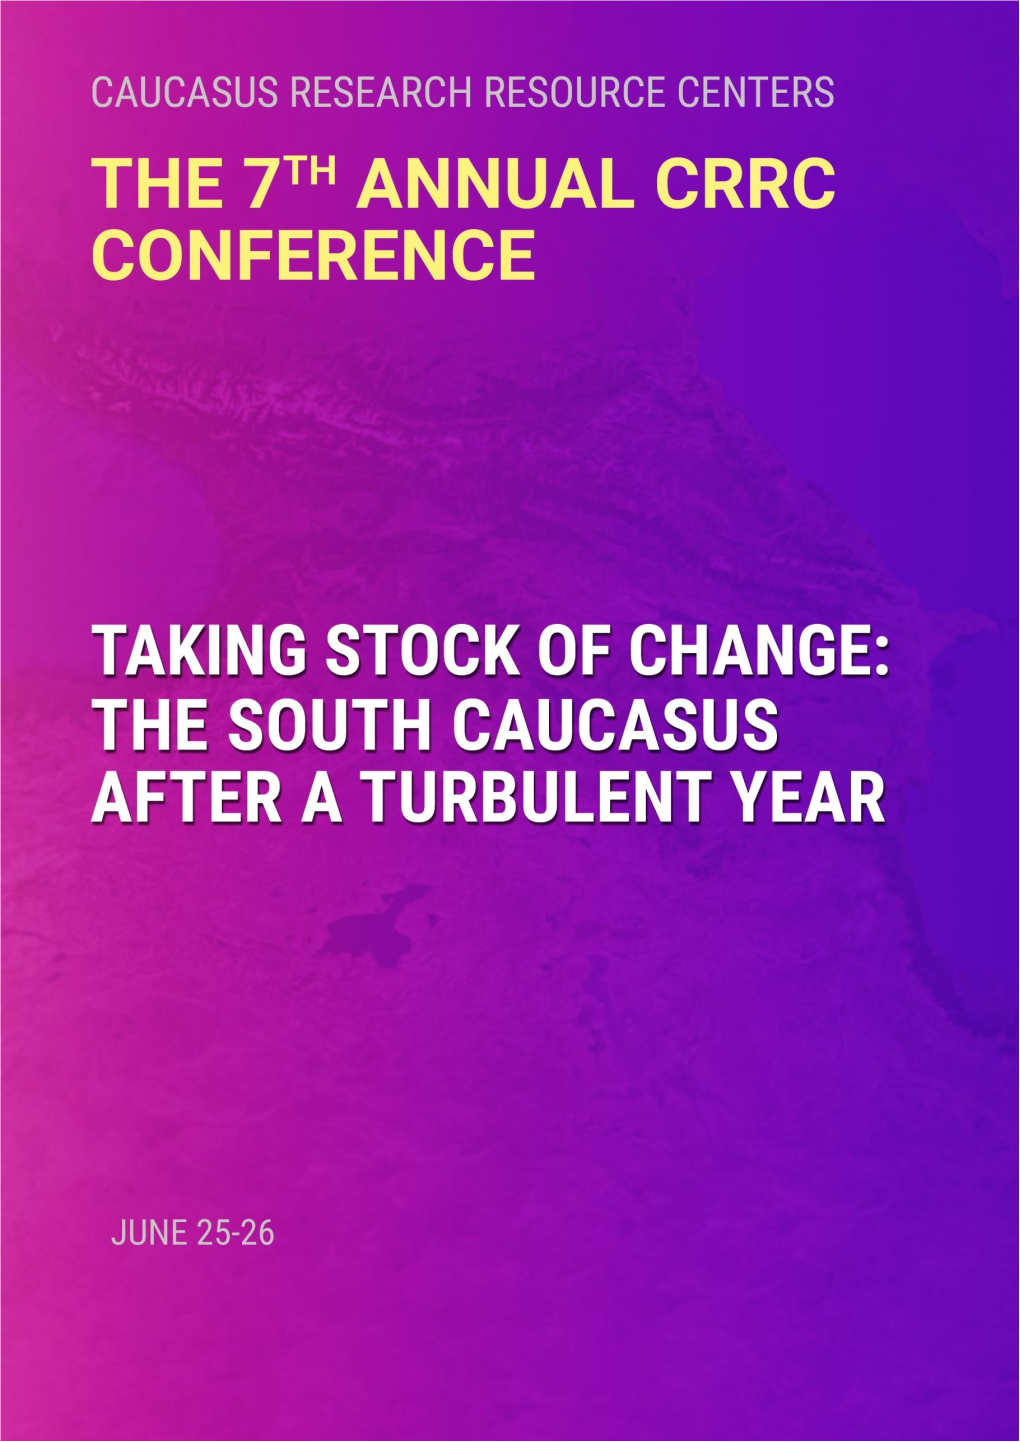 Taking Stock of Change: the South Caucasus After a Turbulent Year